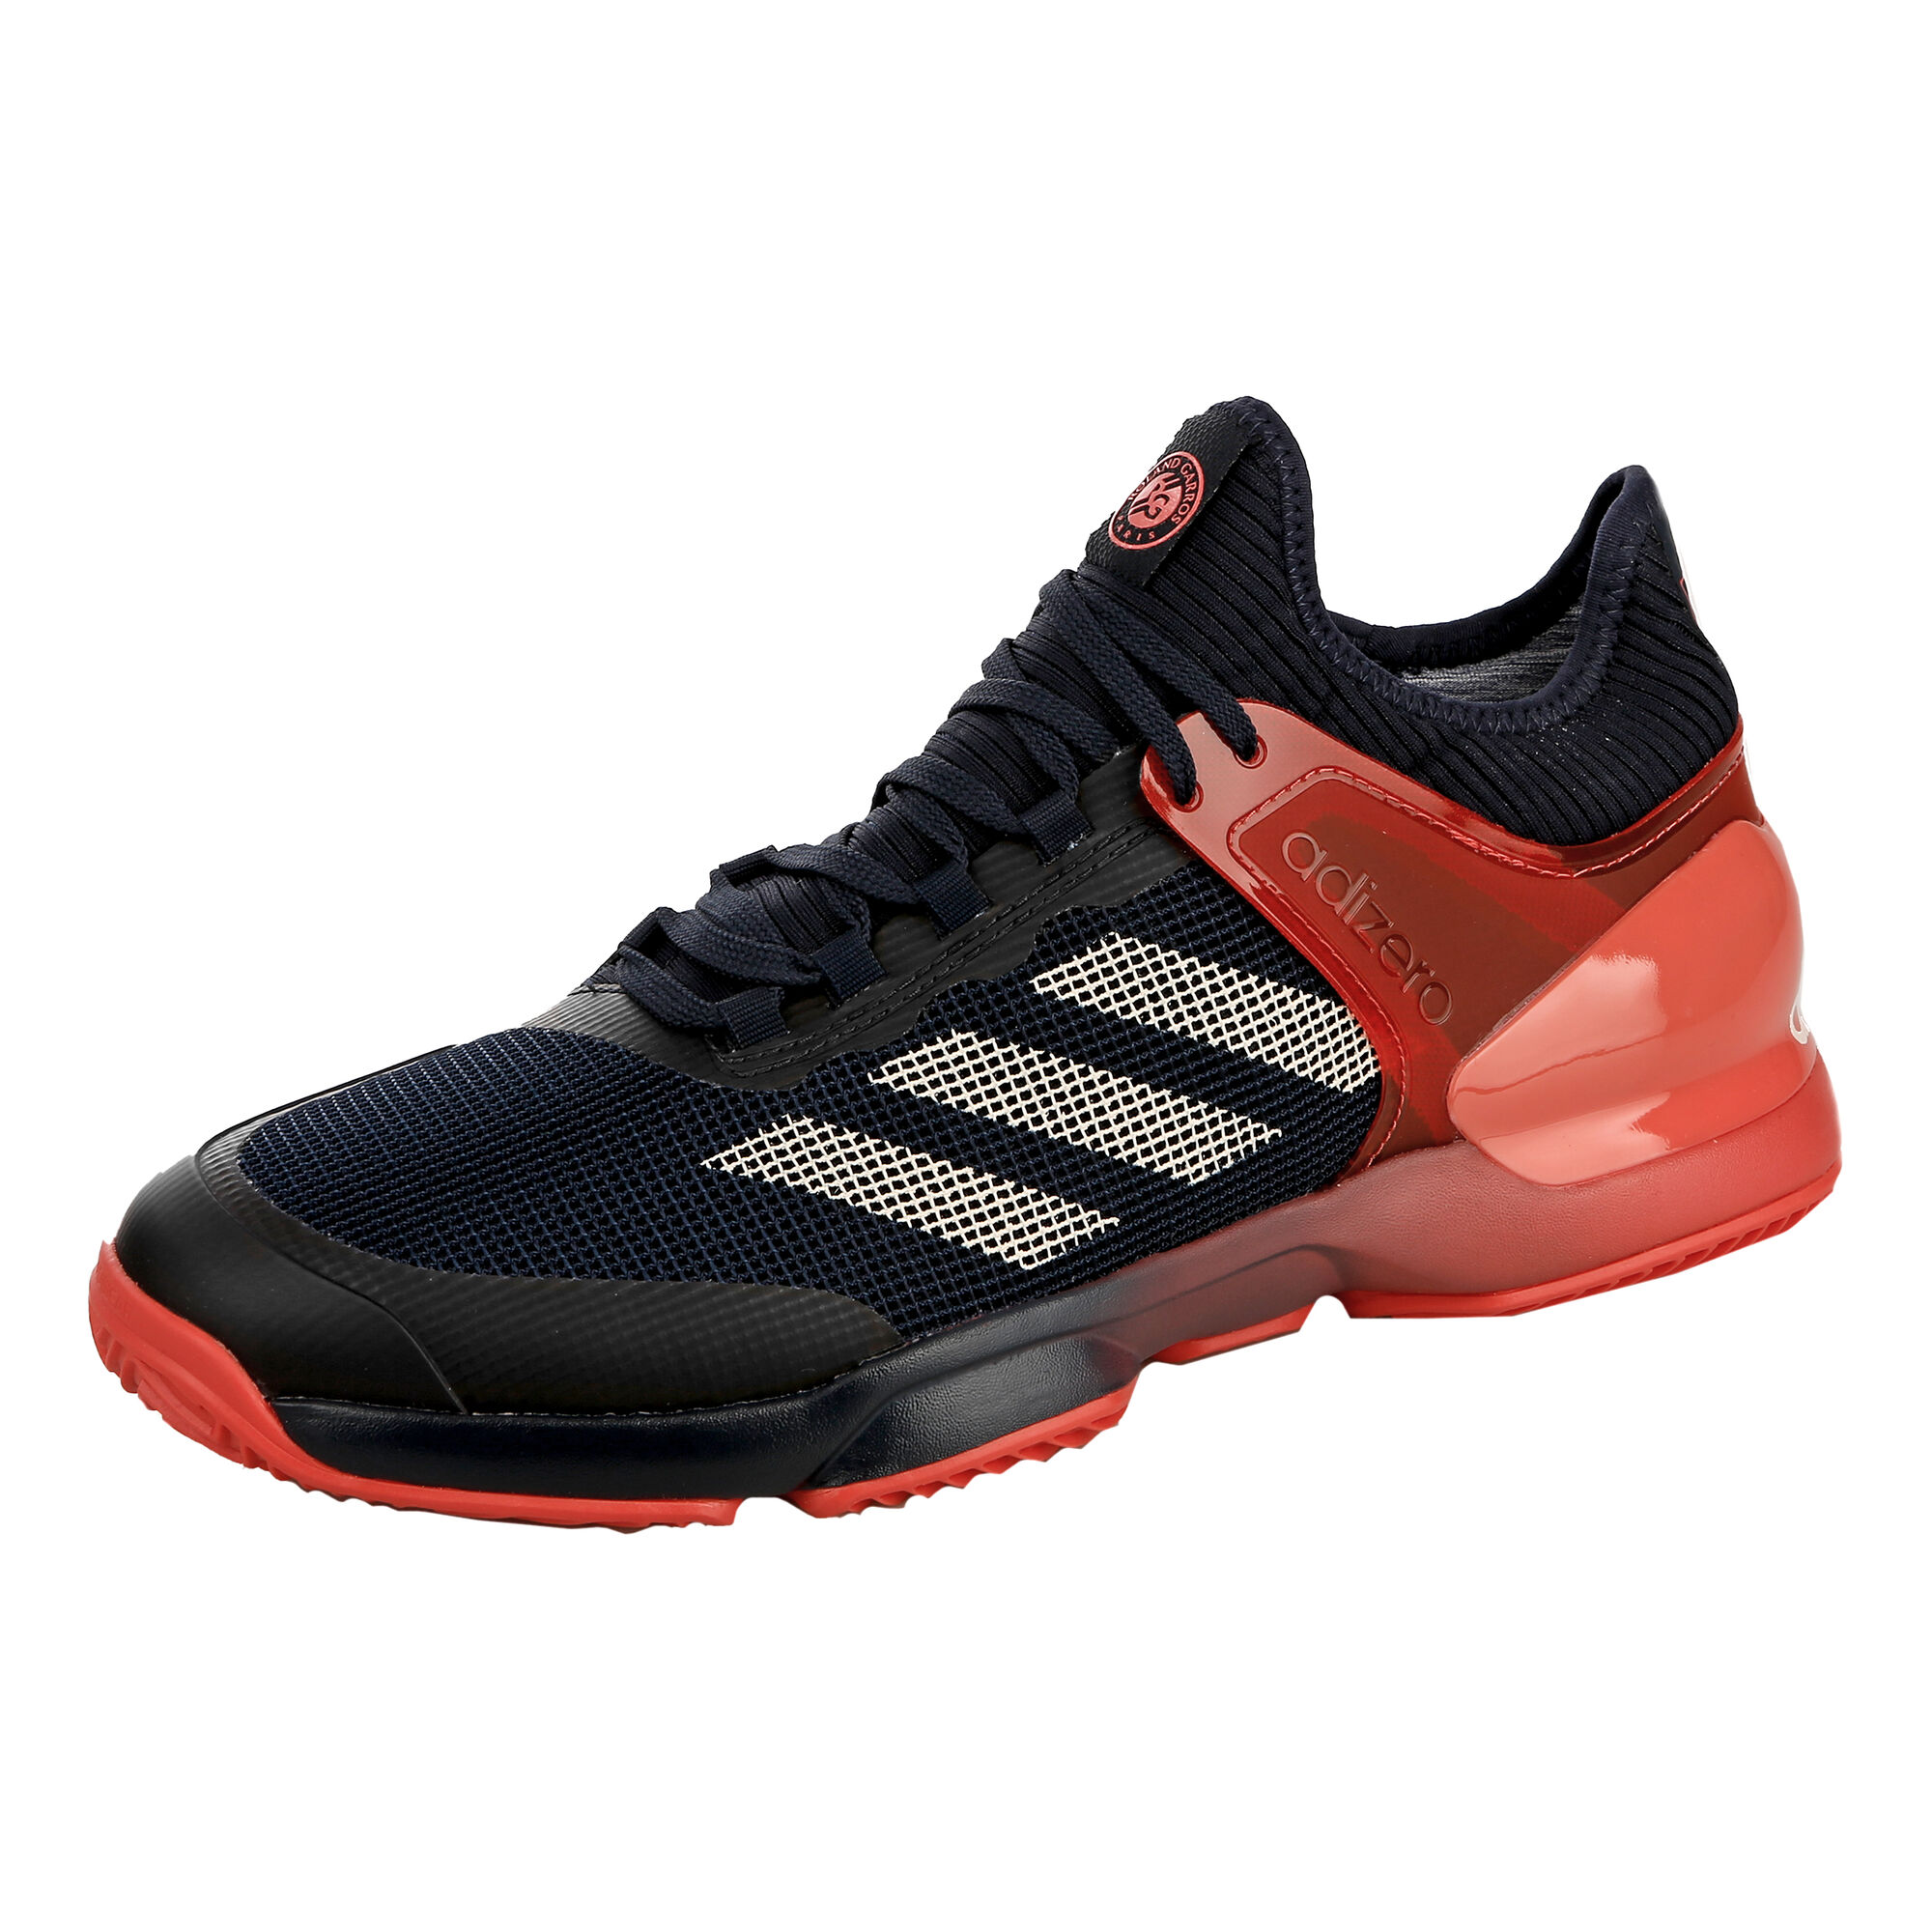 Elucidation microphone The other day buy adidas Adizero Ubersonic 2 Clay Court Shoe Men - Black, Red online |  Tennis-Point